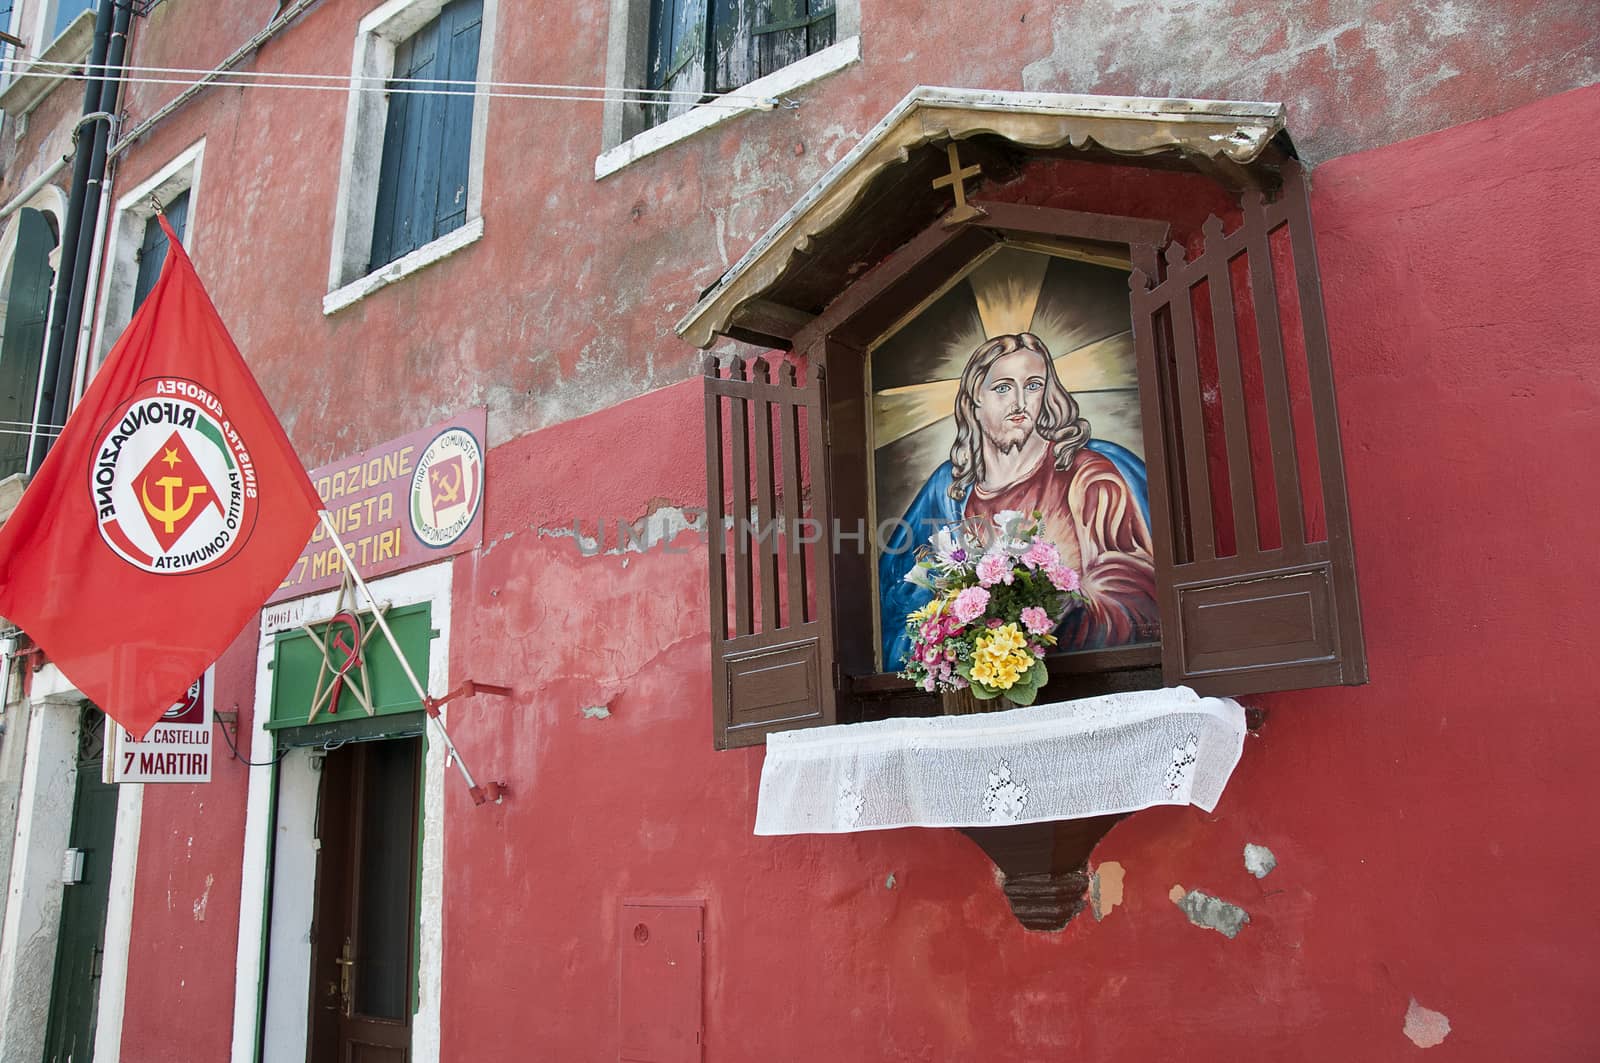 Headquarters of communist party and image of Jesus Christ, Venice, Italy